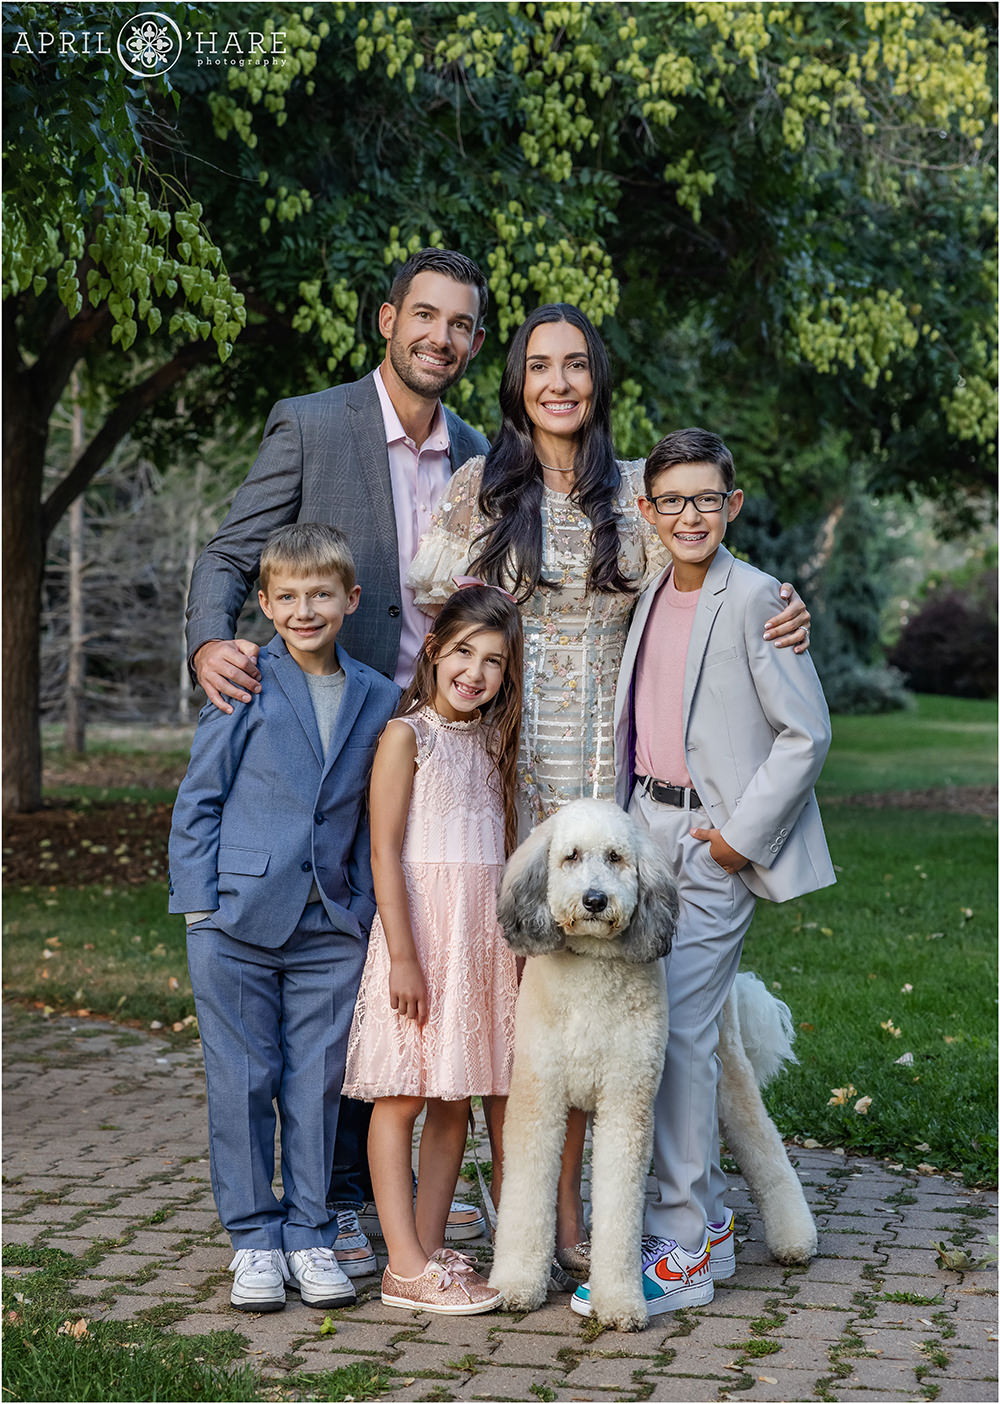 Family of 5 with their white goldendoodle dog at Gallup Gardens in Littleton Colorado